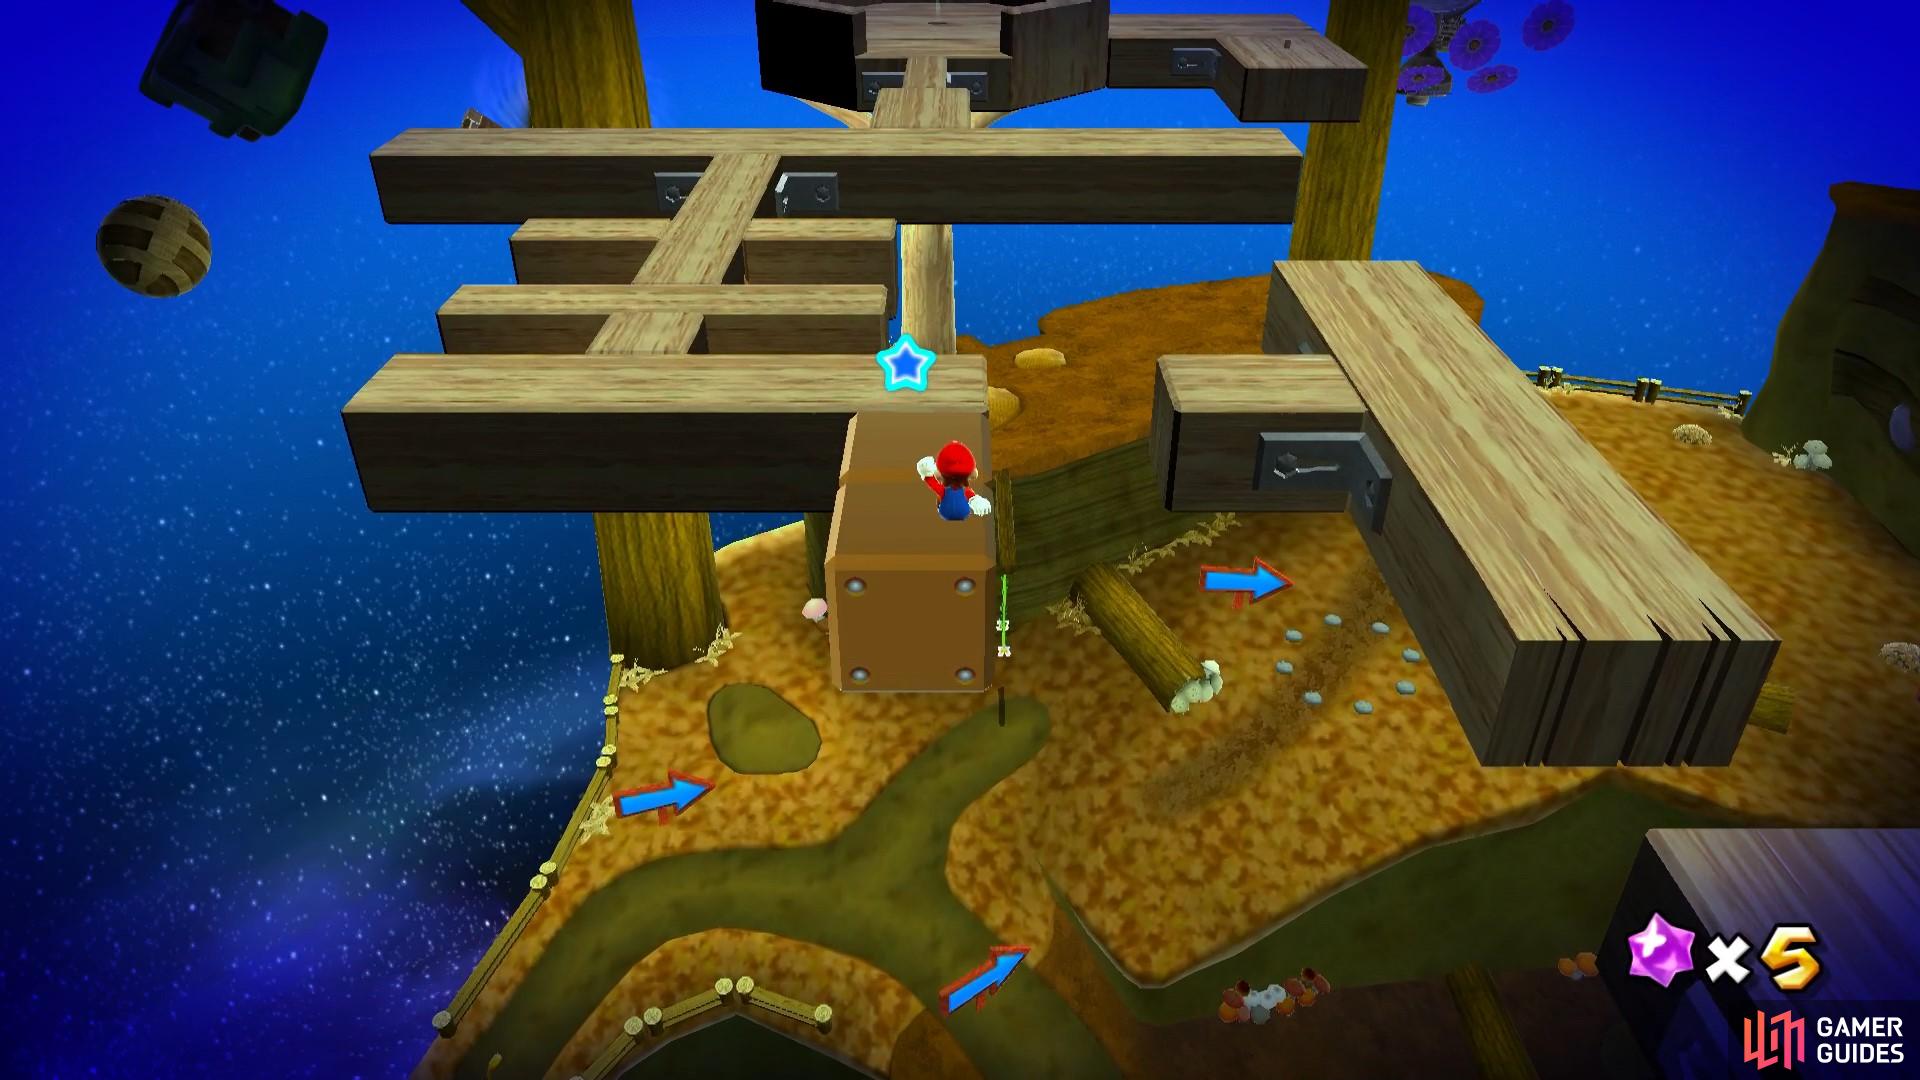 You’ll need to use some shortcuts to get ahead of Cosmic Mario.